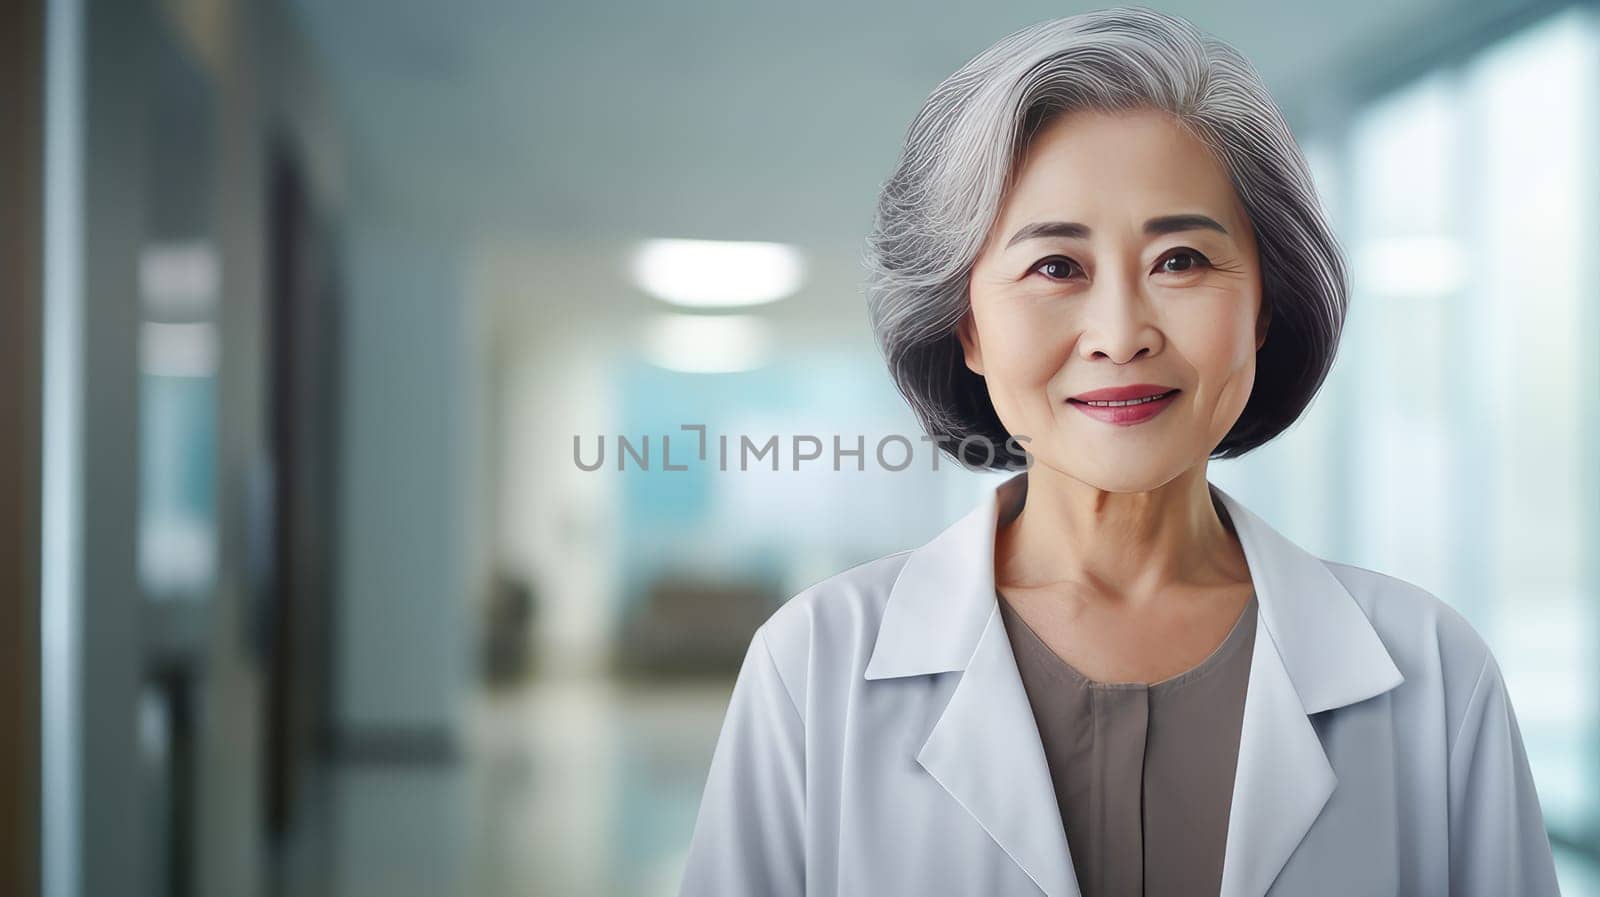 Portrait of a smiling Asian Korean doctor of an elderly old woman with a stethoscope in a medical hospital with modern equipment. Hospital, medicine, doctor and pharmaceutical company, healthcare and health insurance.